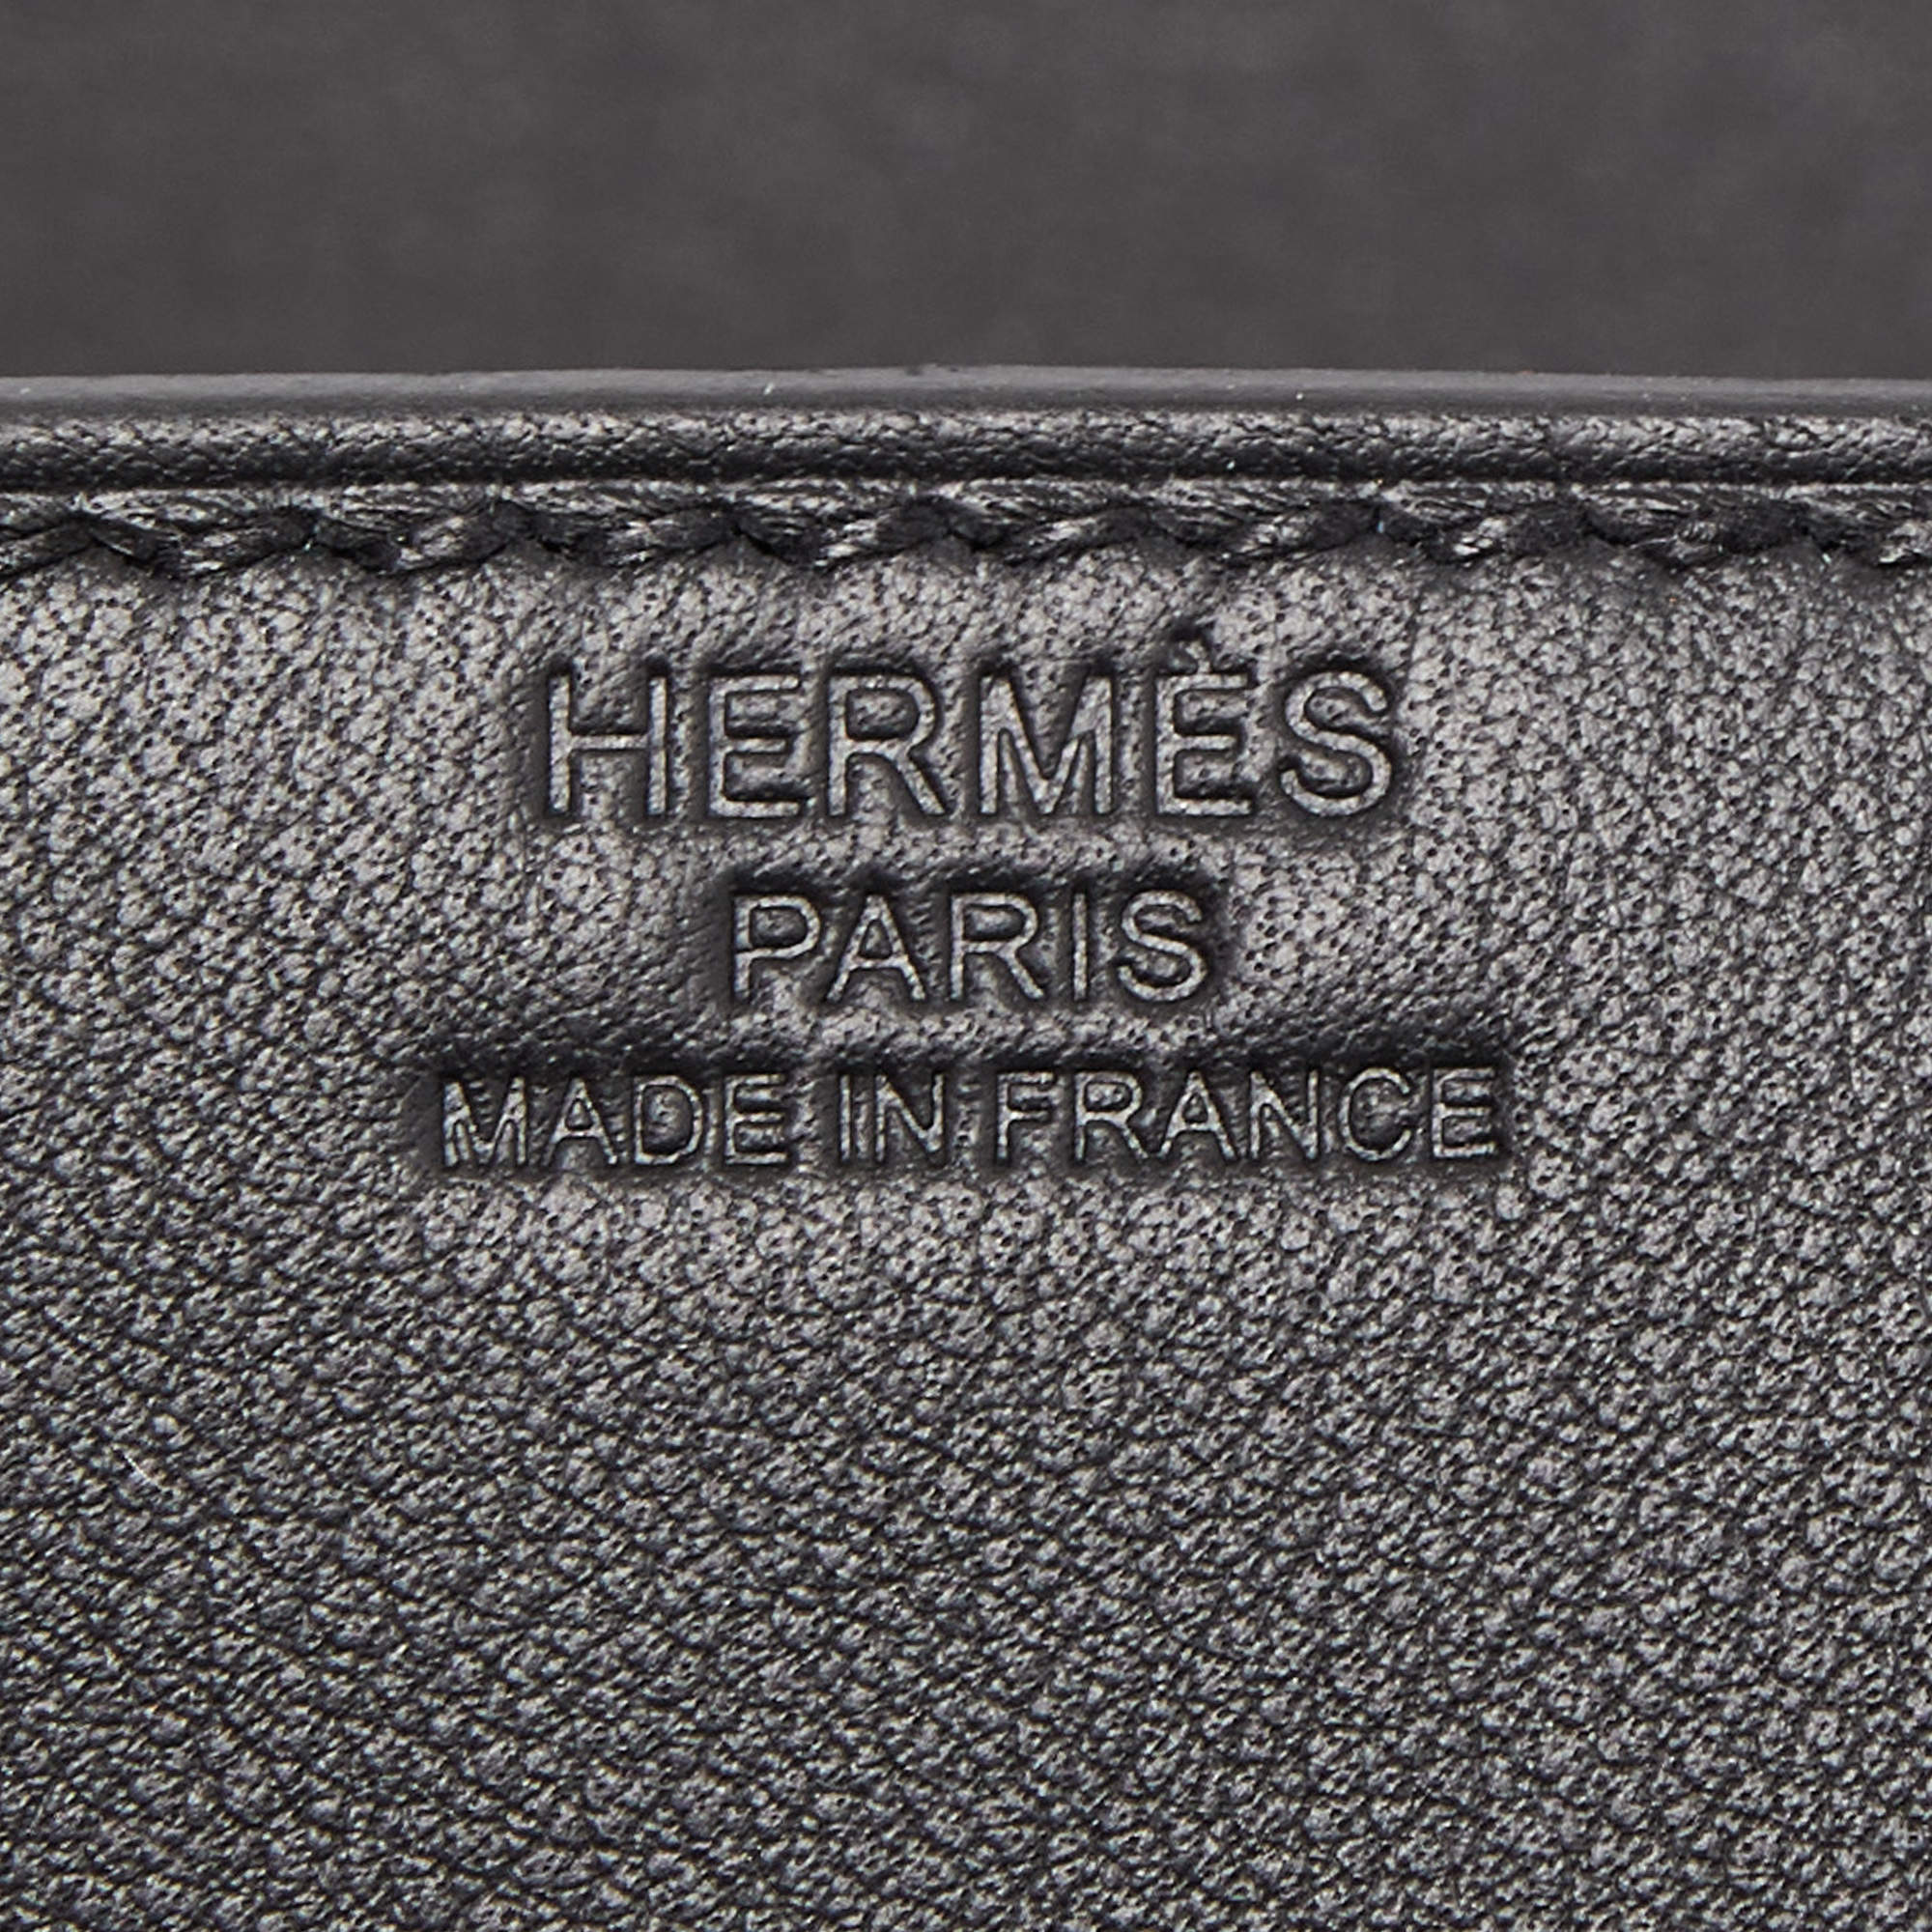 Hermes Clutch Burgundy Leather – LUX USA